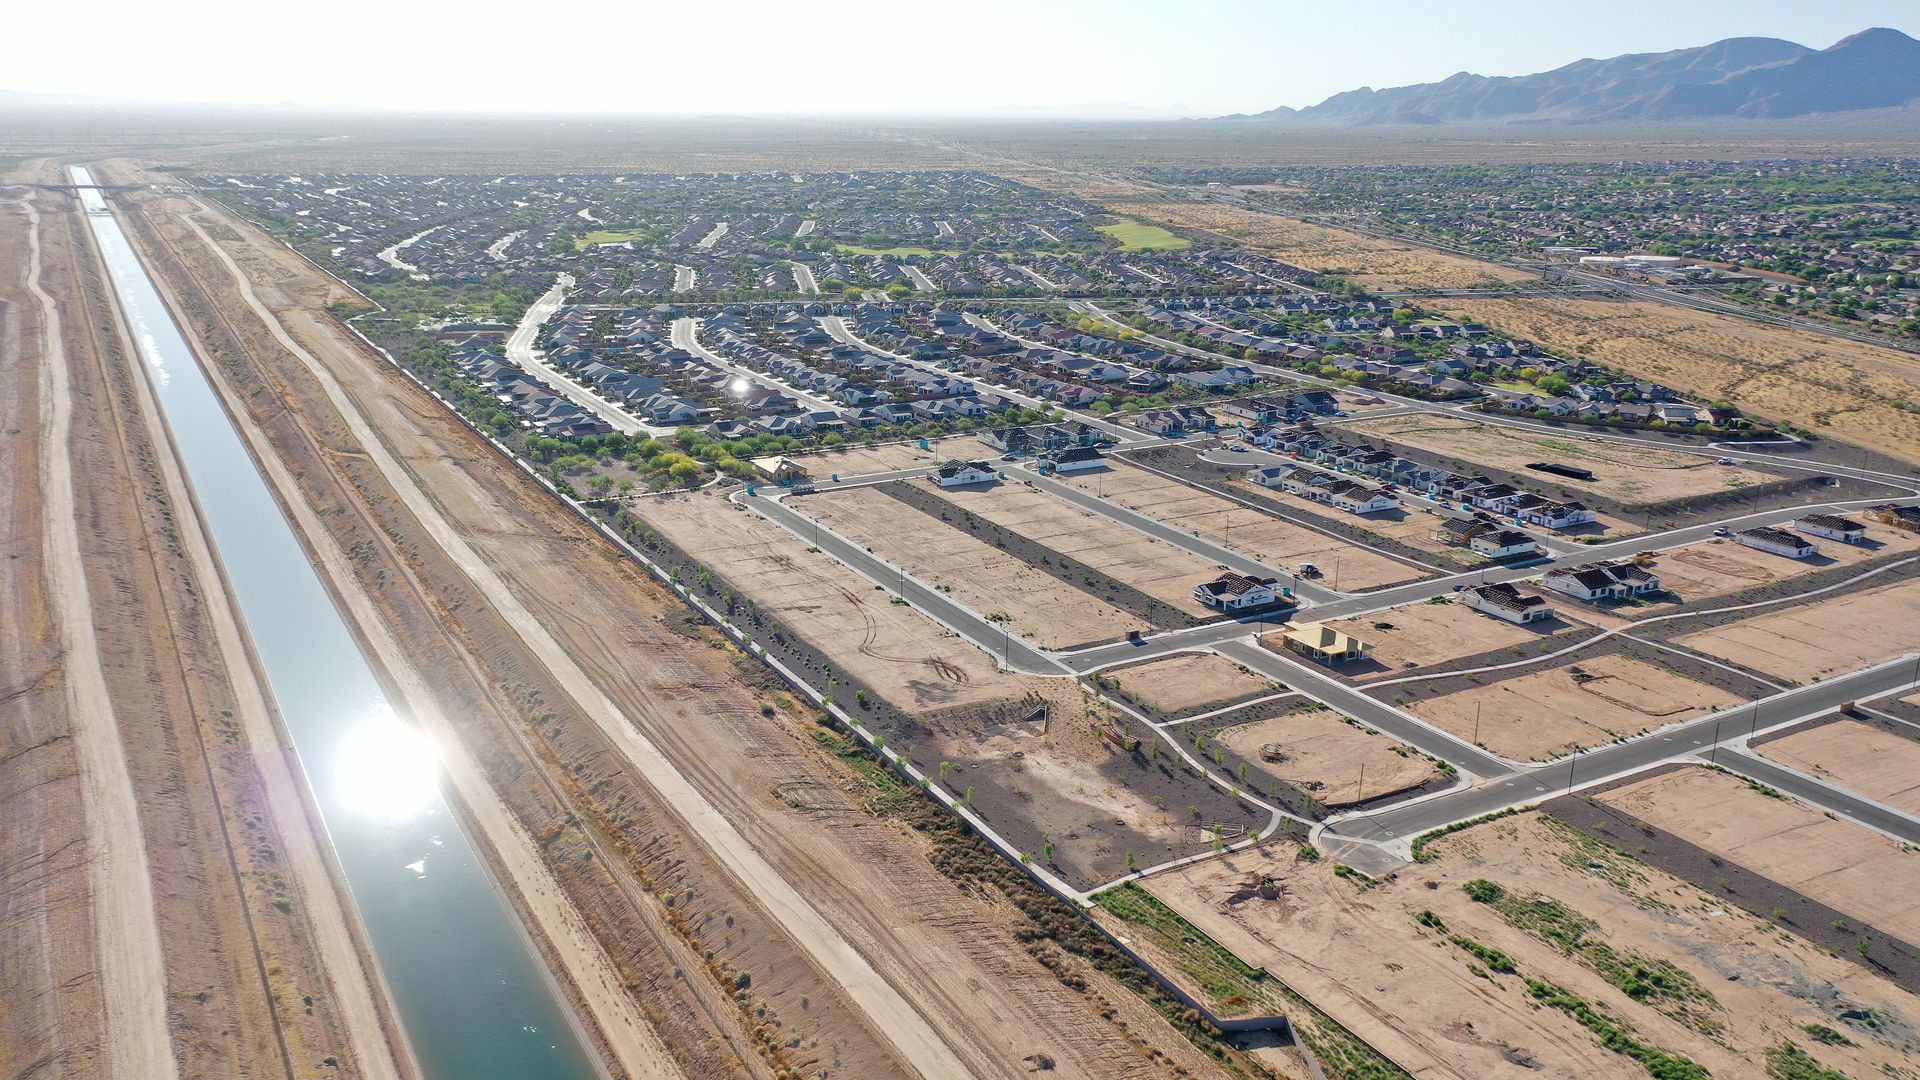 An aerial view of a canal running alongside housing subdivisions and vacant desert land.